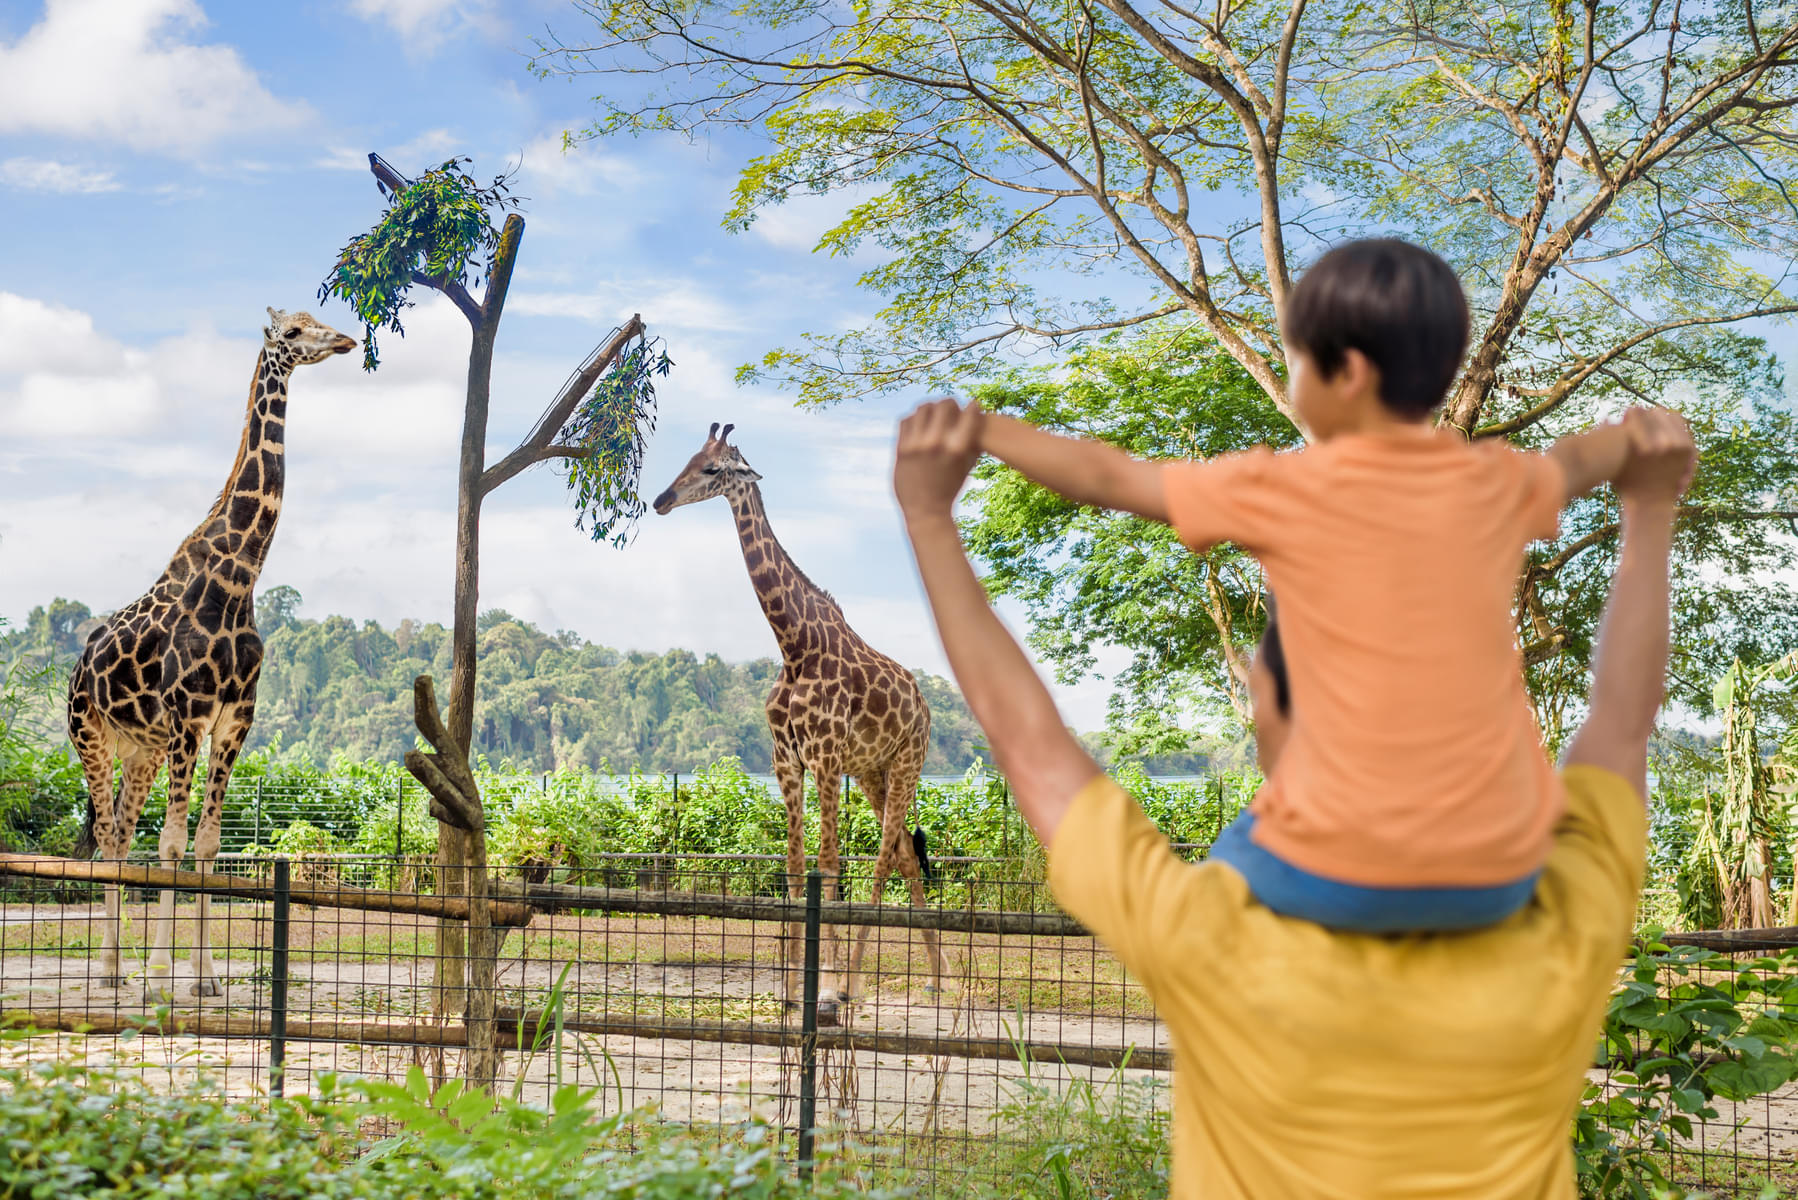 Marvel at the giraffes as you stroll inside the zoo